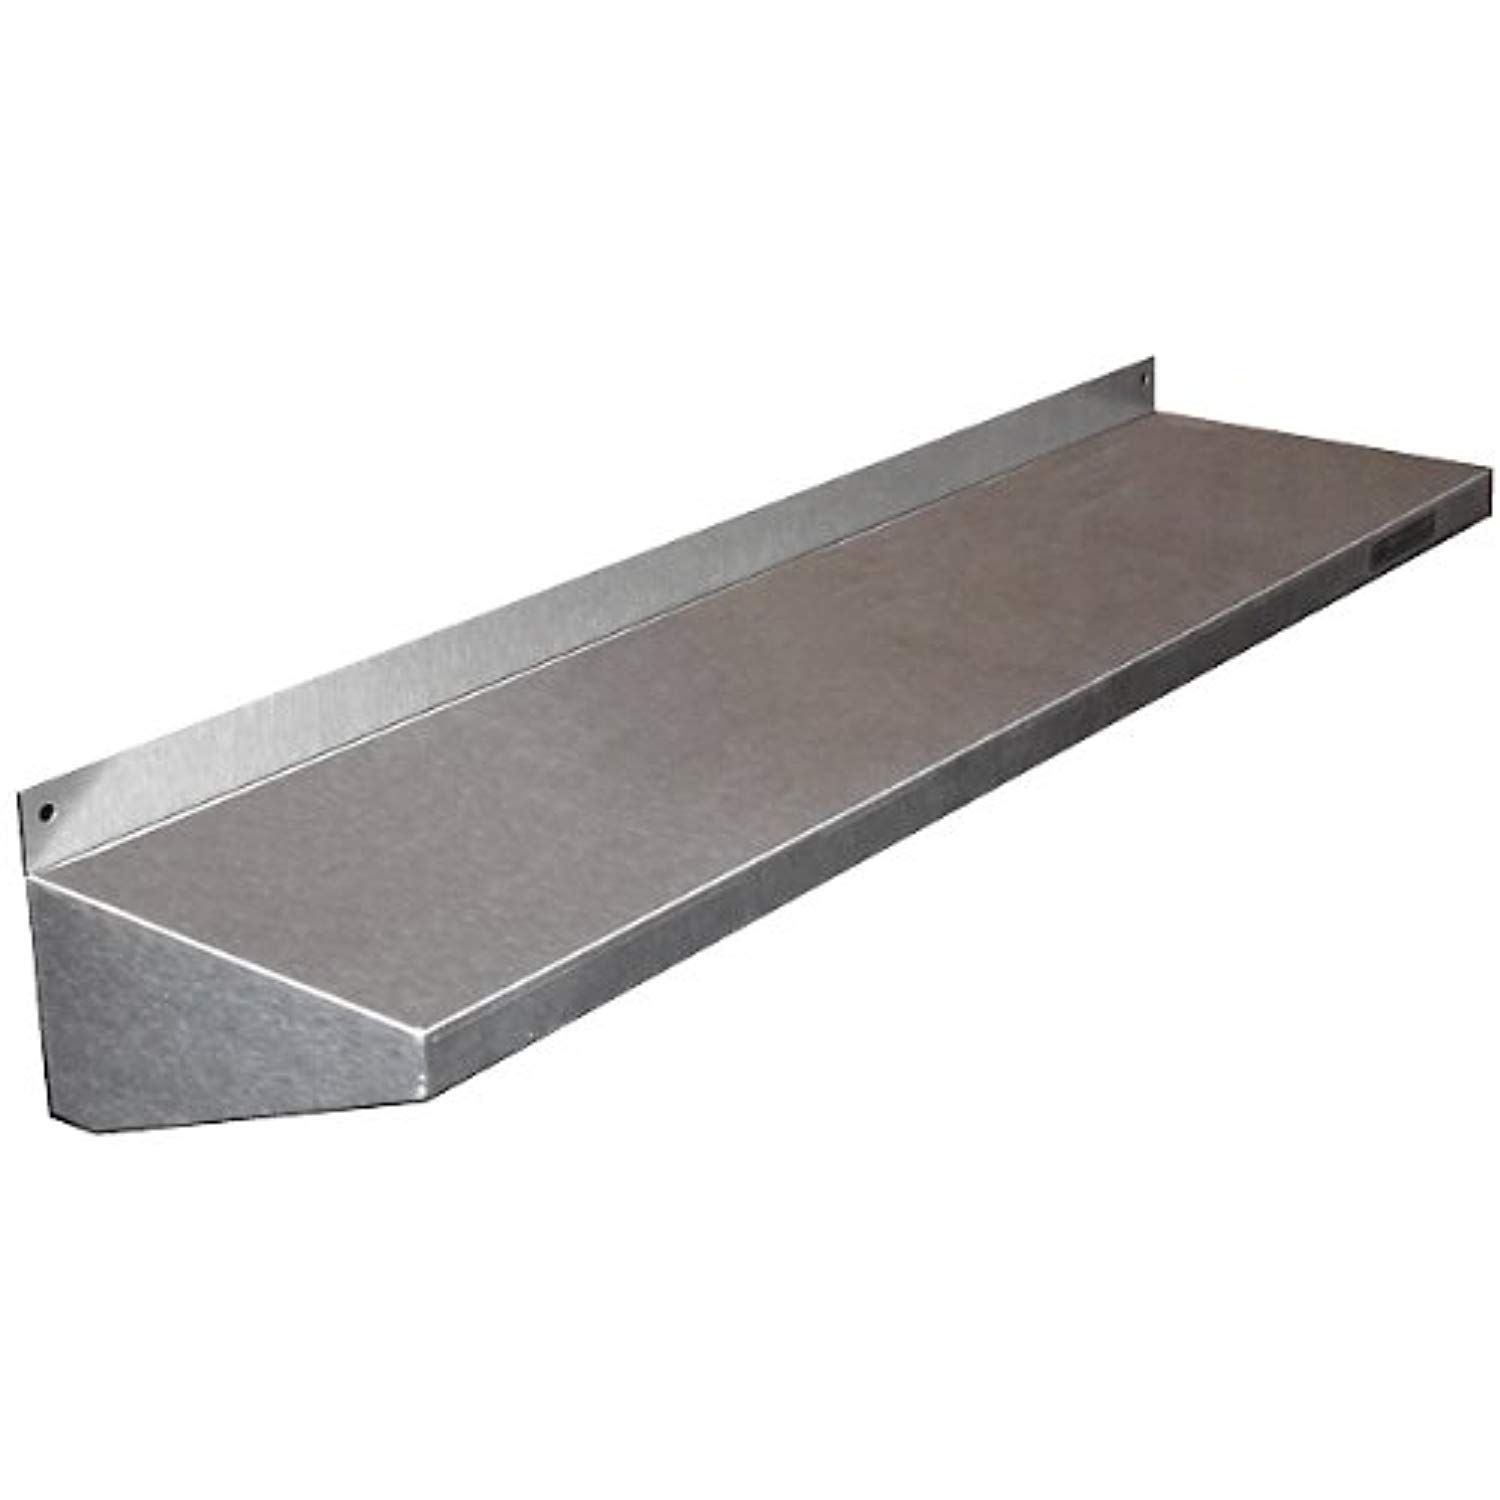 Stainless Steel Wall Shelf - 6 Inches Deep: 24"L